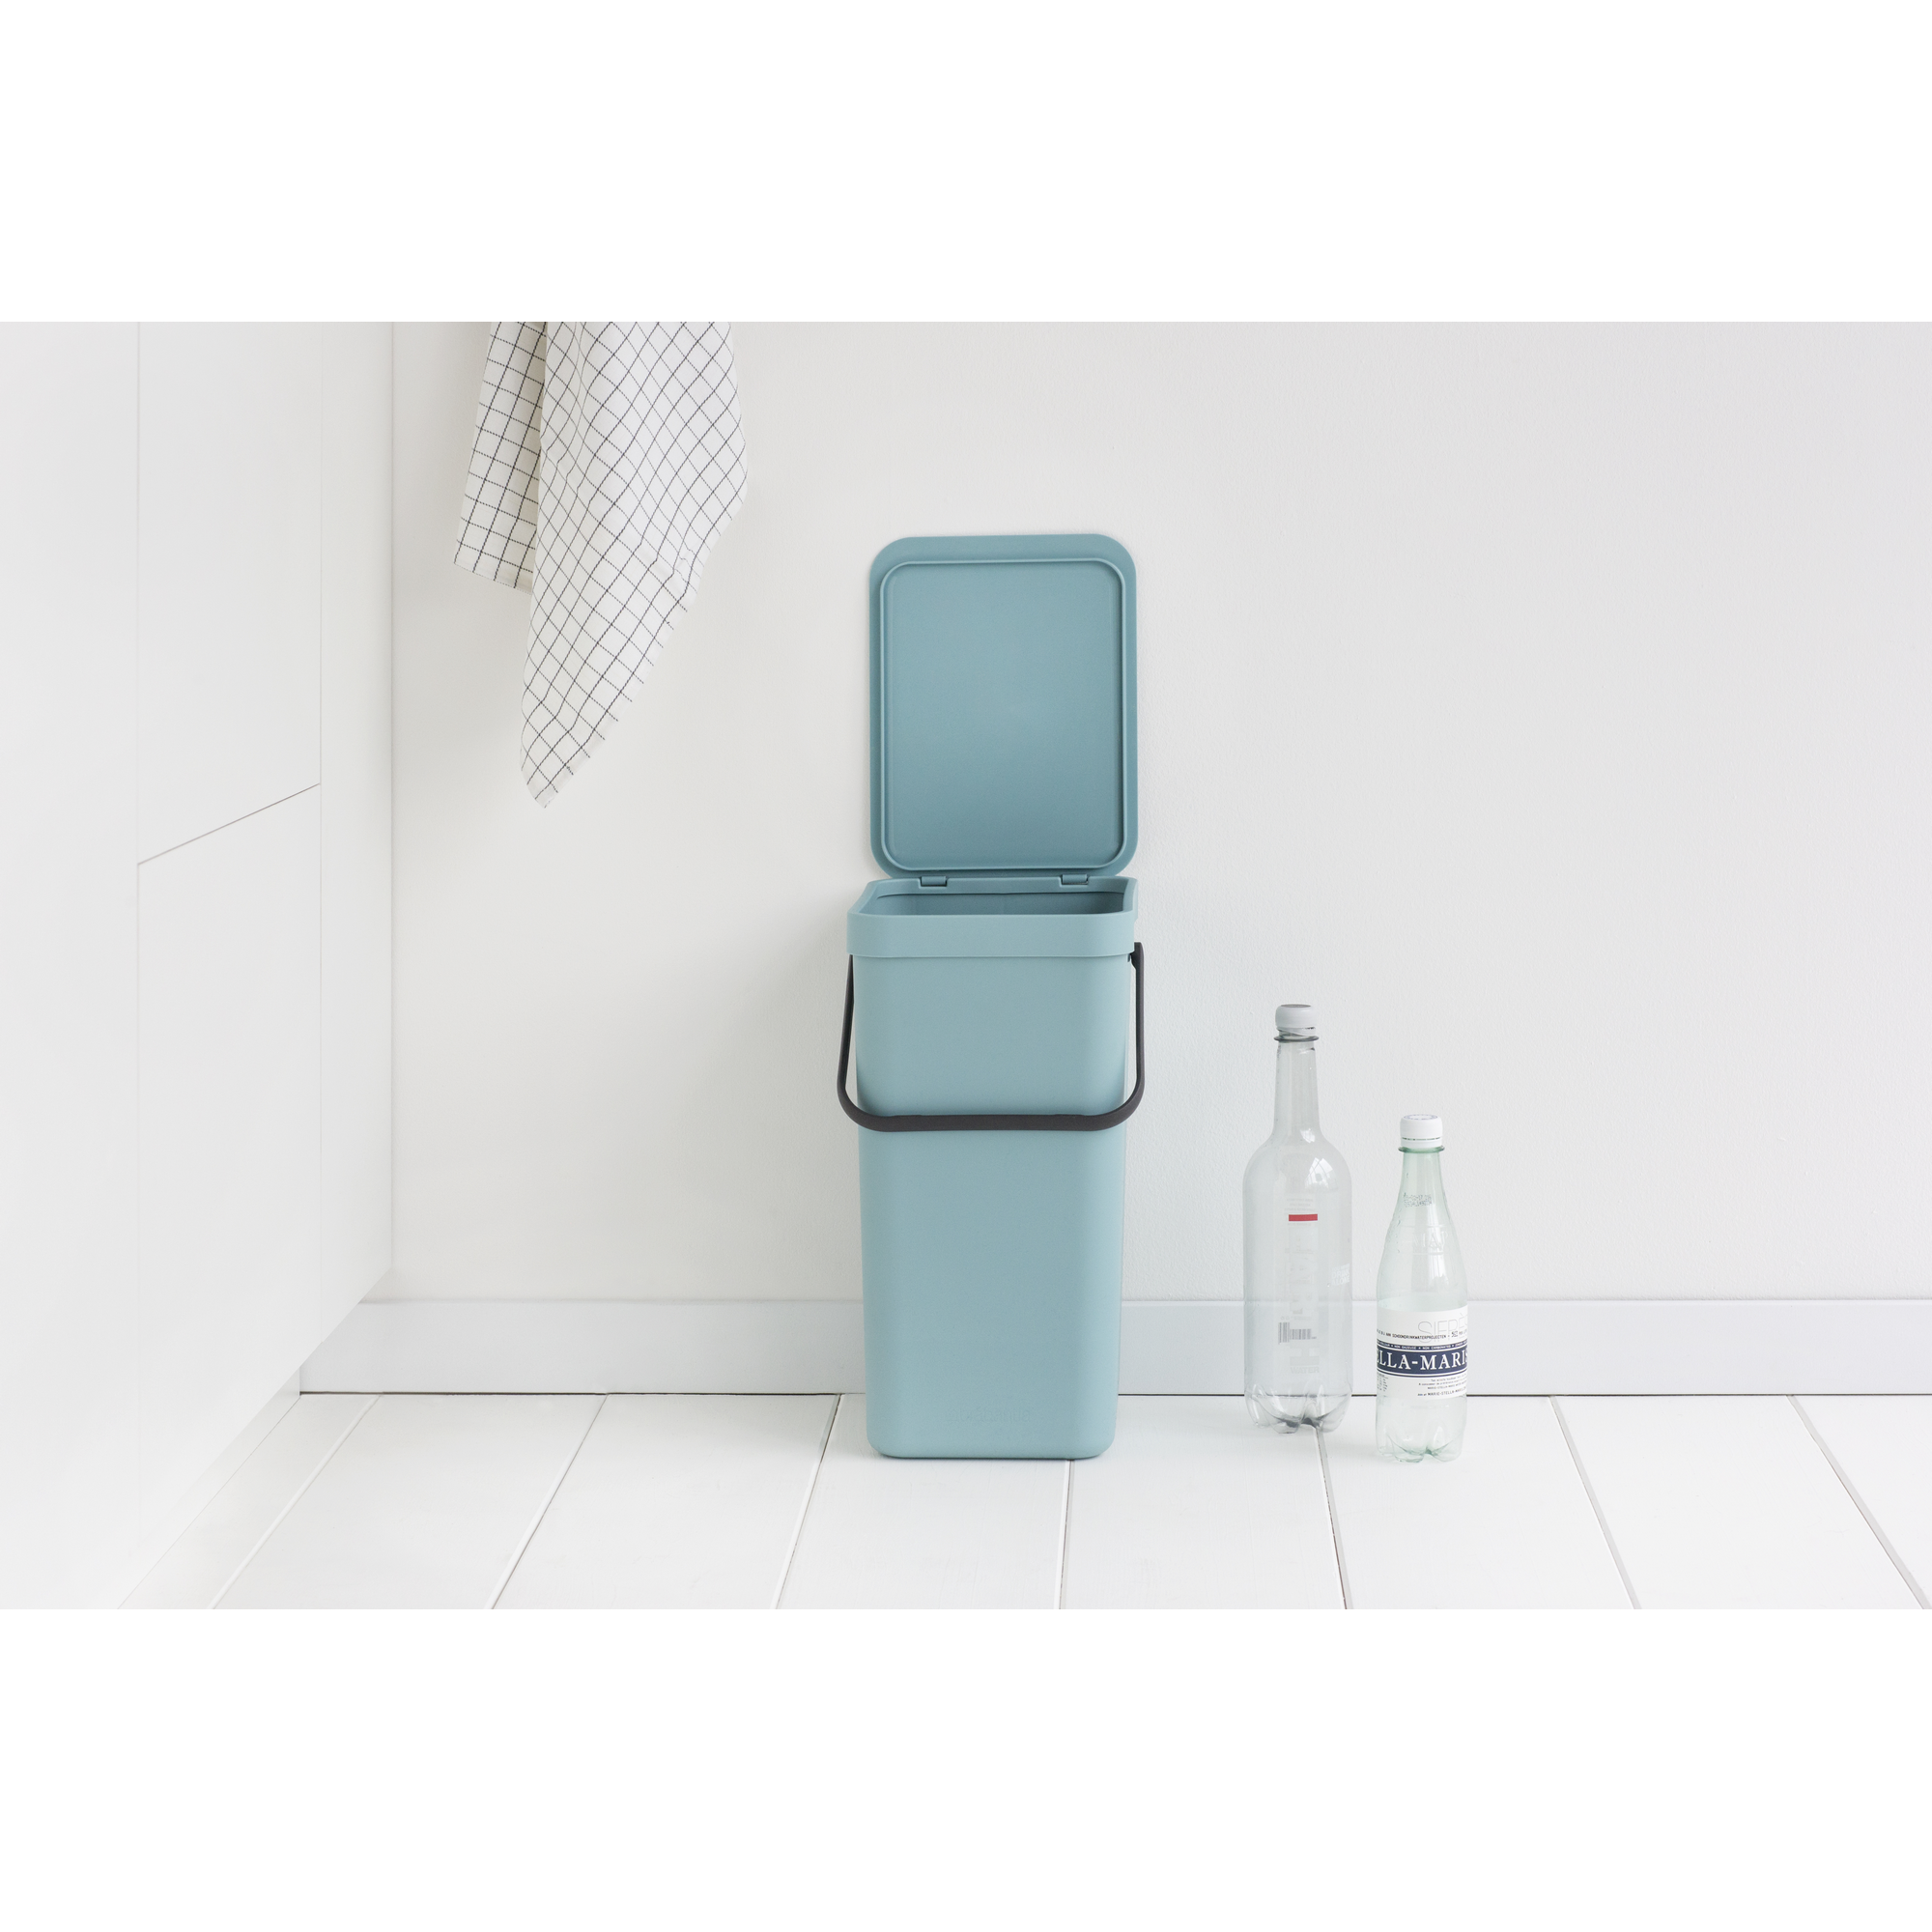 Abfallbehälter 'Sort & Go' 16 l blau + product picture